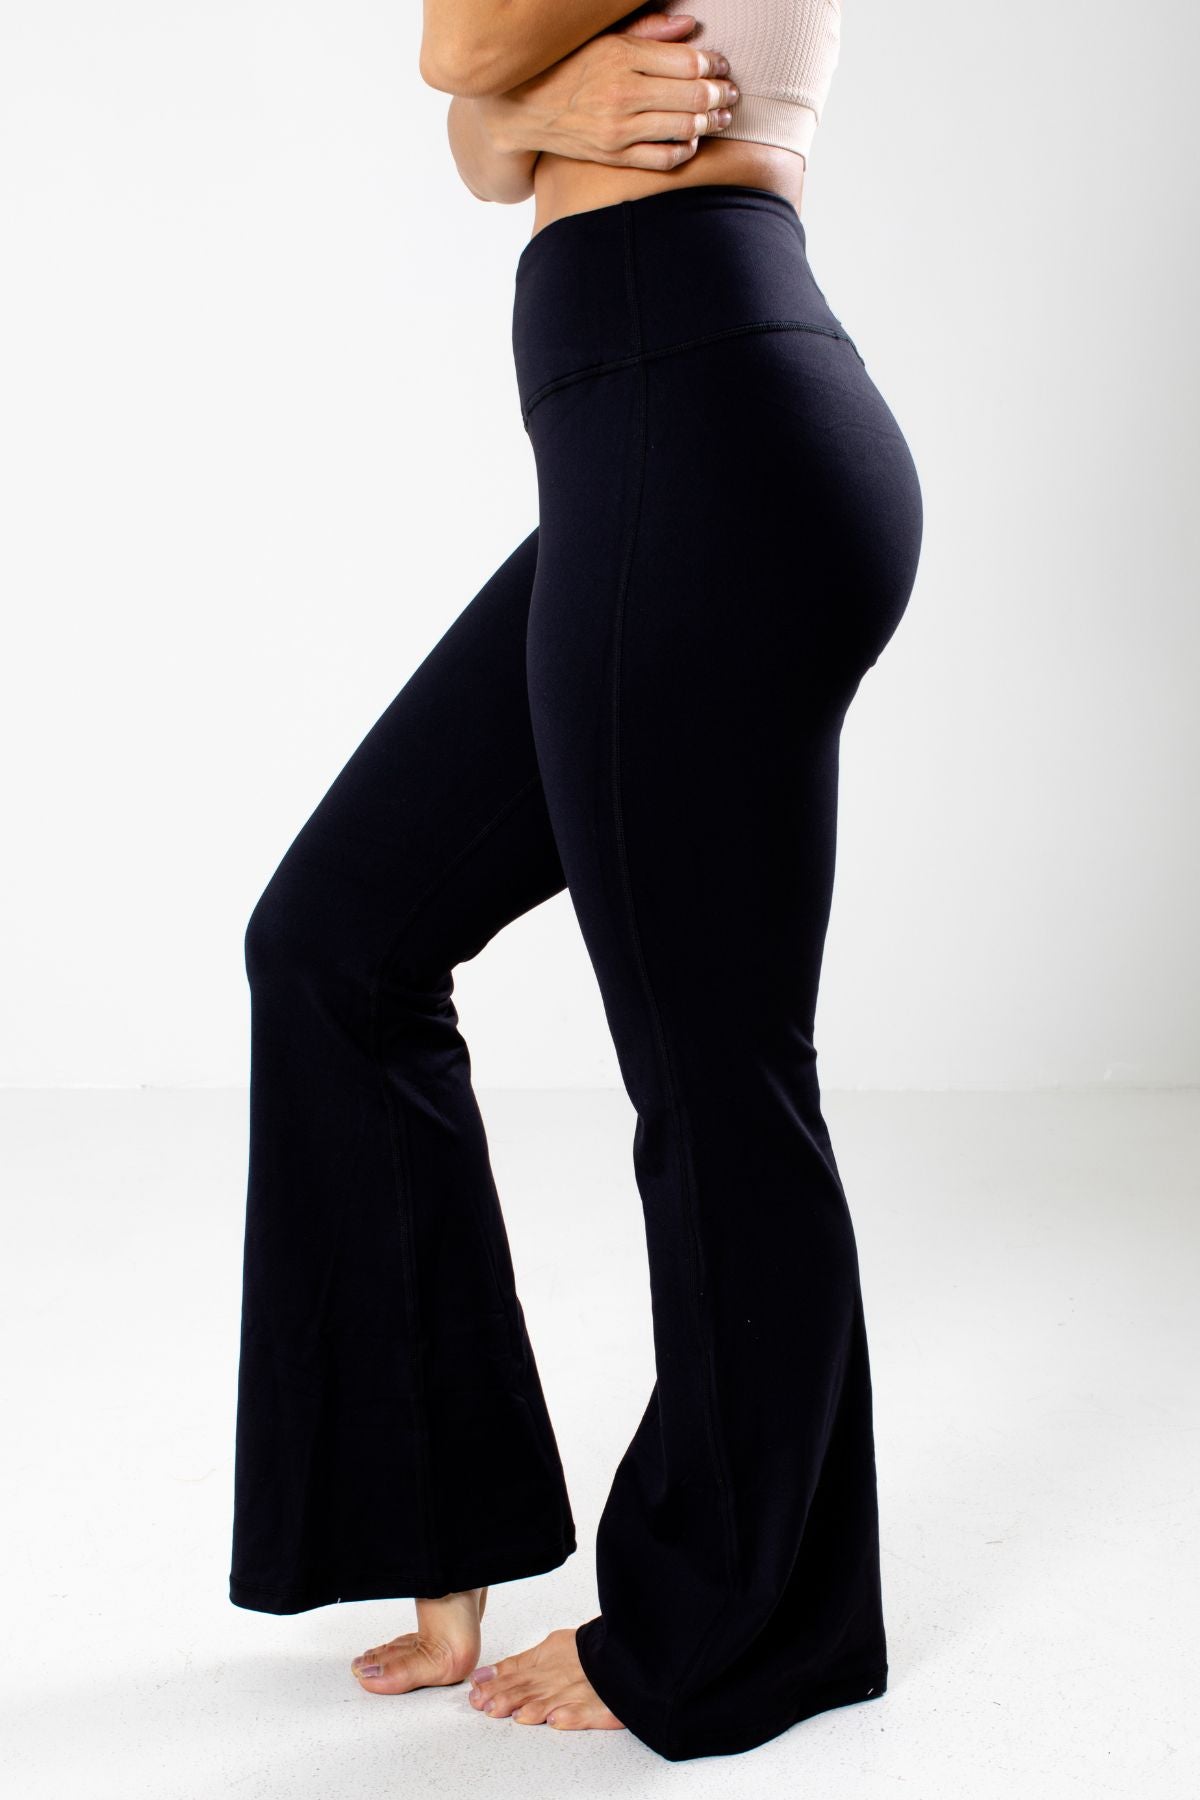 Black High Waisted Boutique Yoga Pants for Women